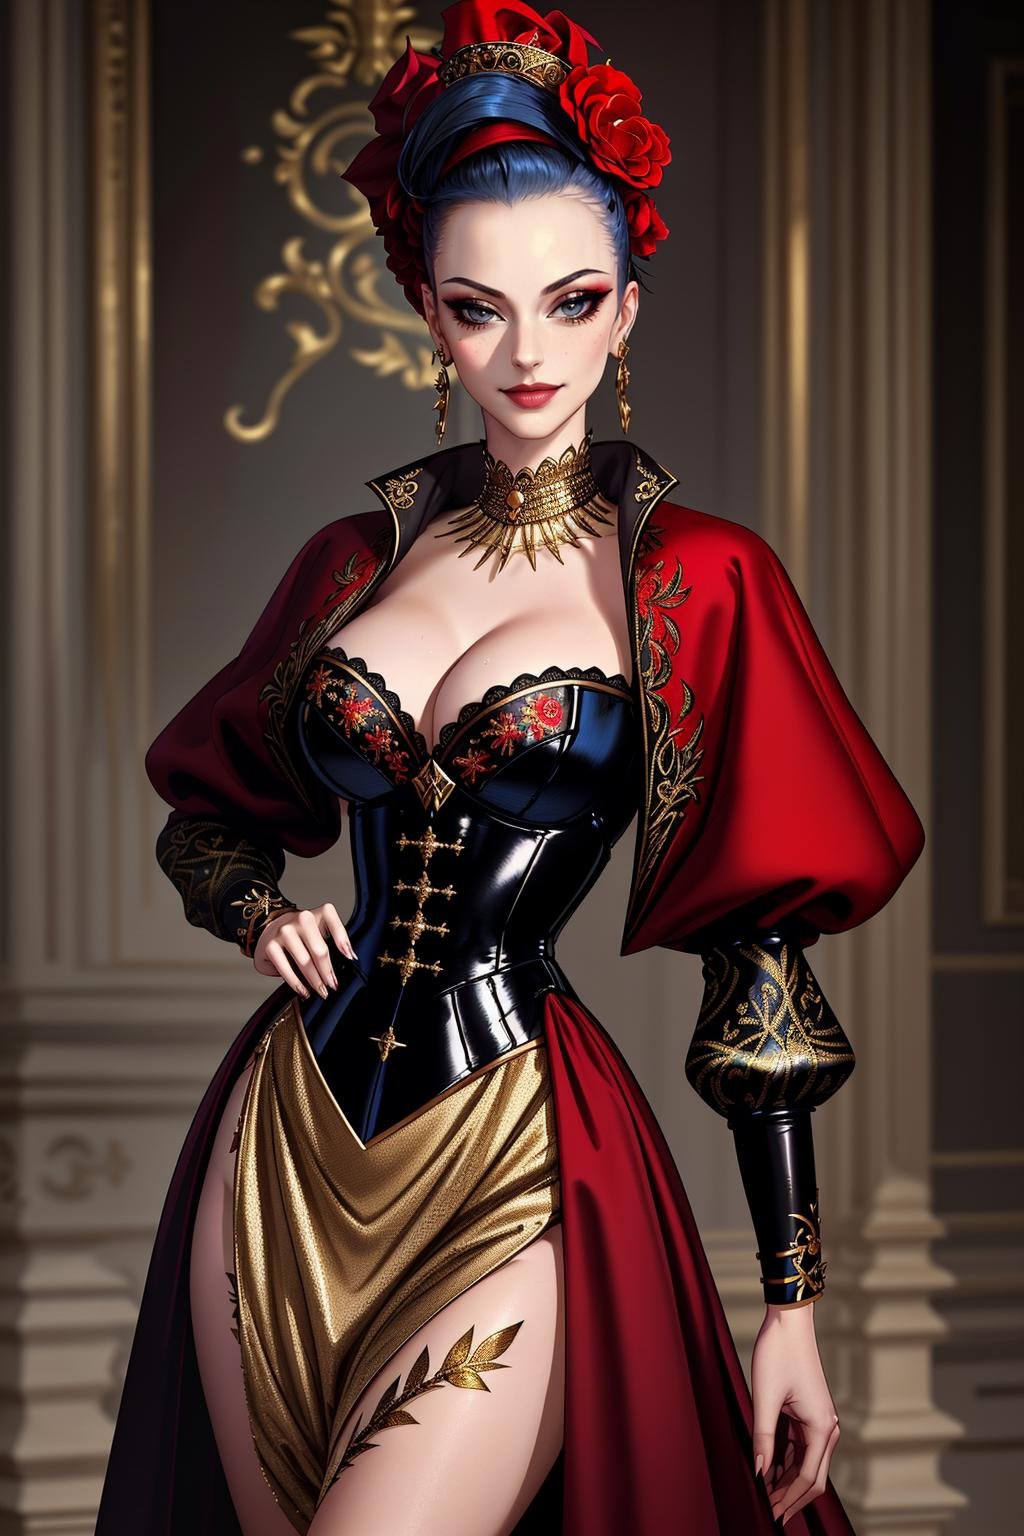 ((Masterpiece, best quality,edgQuality)),smirk,smug,Haute_Couture, red corset,golden embroidery, woman wearing a Haute_Couture dress, edgTM, wearing edgTM_style fashion, eccentric clothing <lora:edgLycorisMugler:0.75>